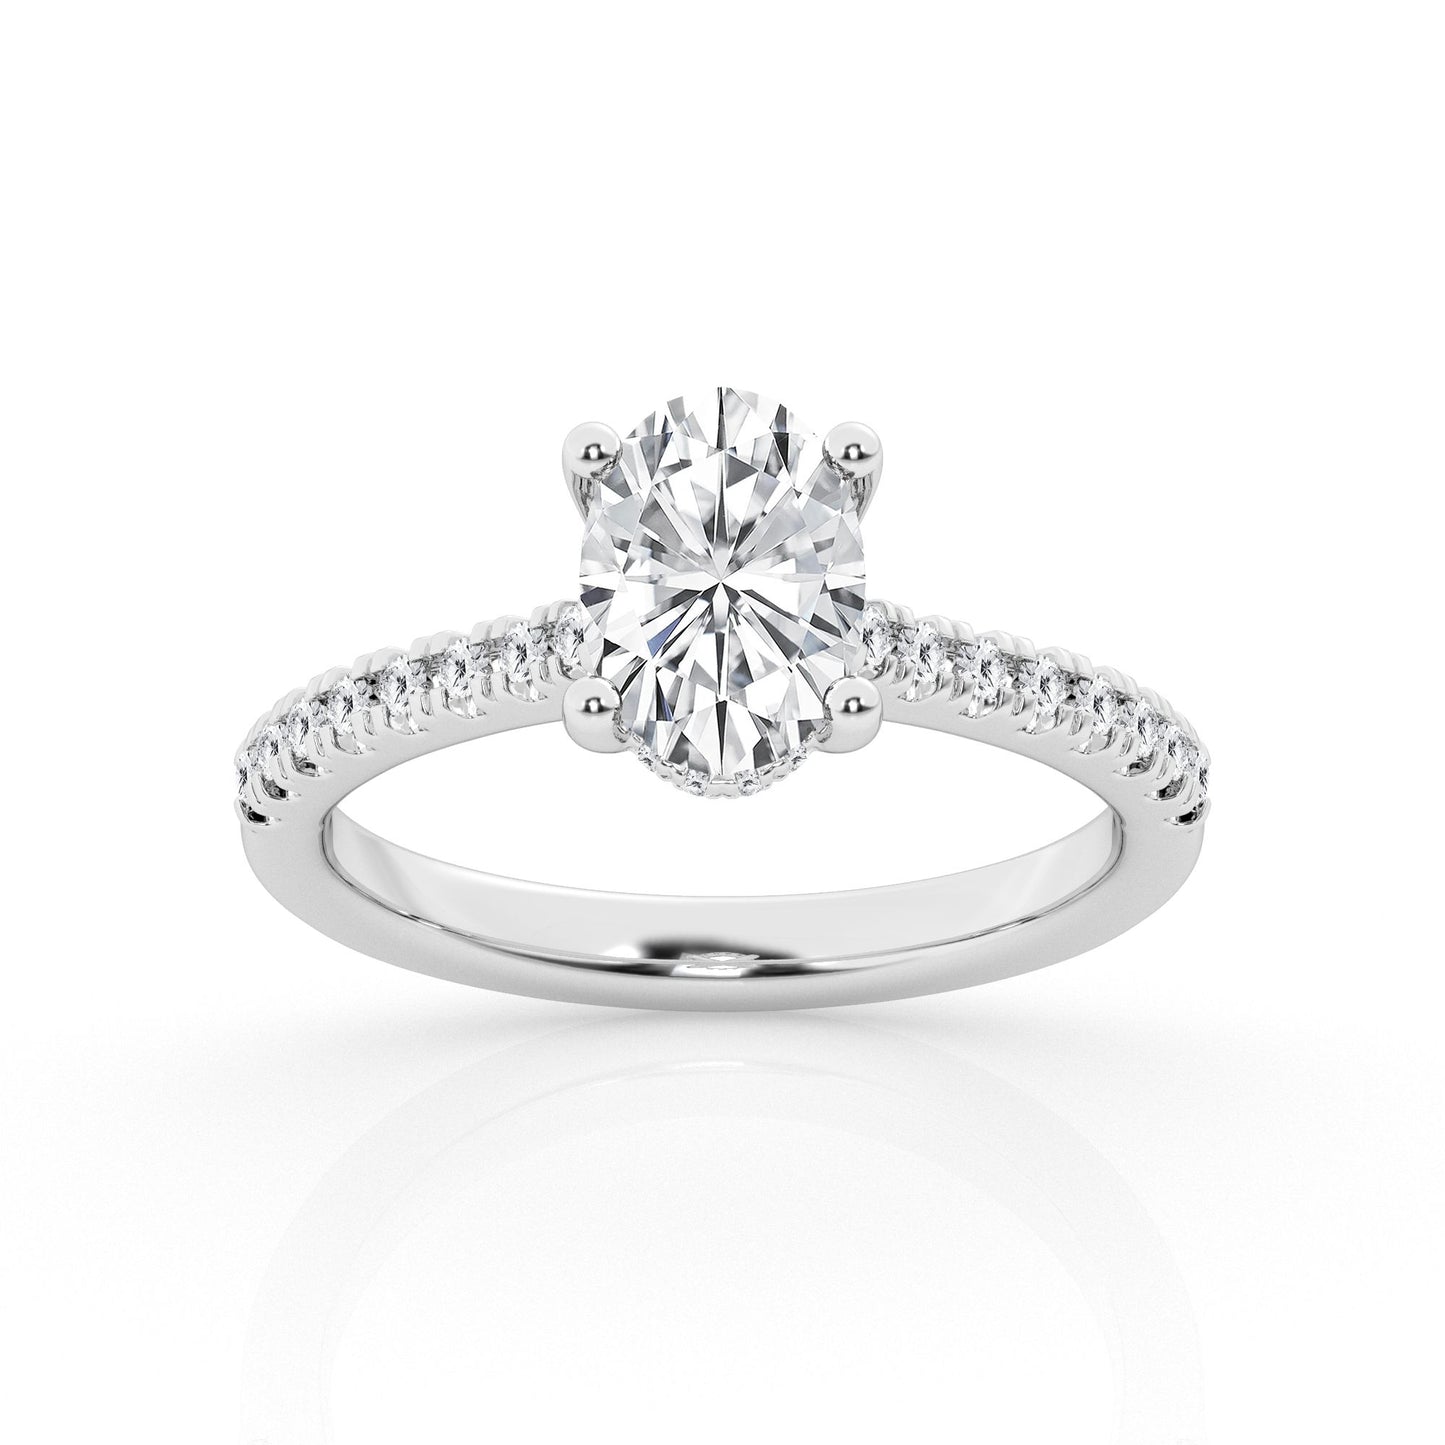 3.00 cttw Hidden Halo Bridal Ring with 2.50 ct Oval Center Stone